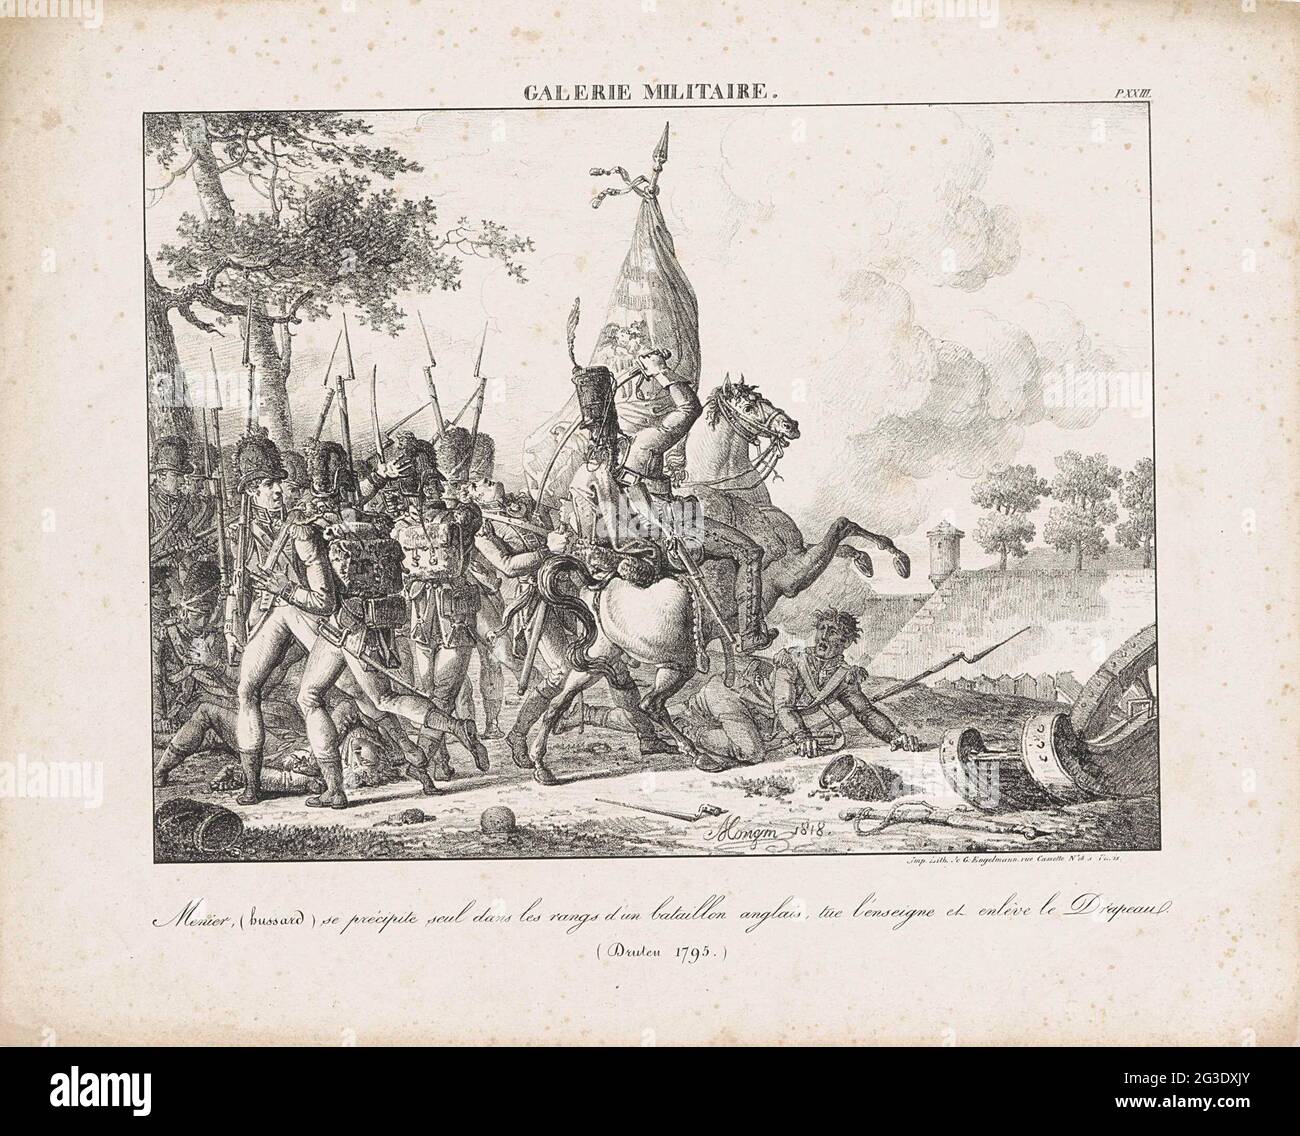 Hero's act of the Huzaar Hussier, at Druten in 1795; Military / Menier Gallery, (Hussard) SE Précipite Seul Dance Les Rangs d'Un Batailon (...) (Druten 1795). The French Huzaar Menier stands on a british battalion on his own, kills the banquet carrier and conquers the banner. During fights at Druten in 1795. Numbered at the top right: P XXIII. Stock Photo